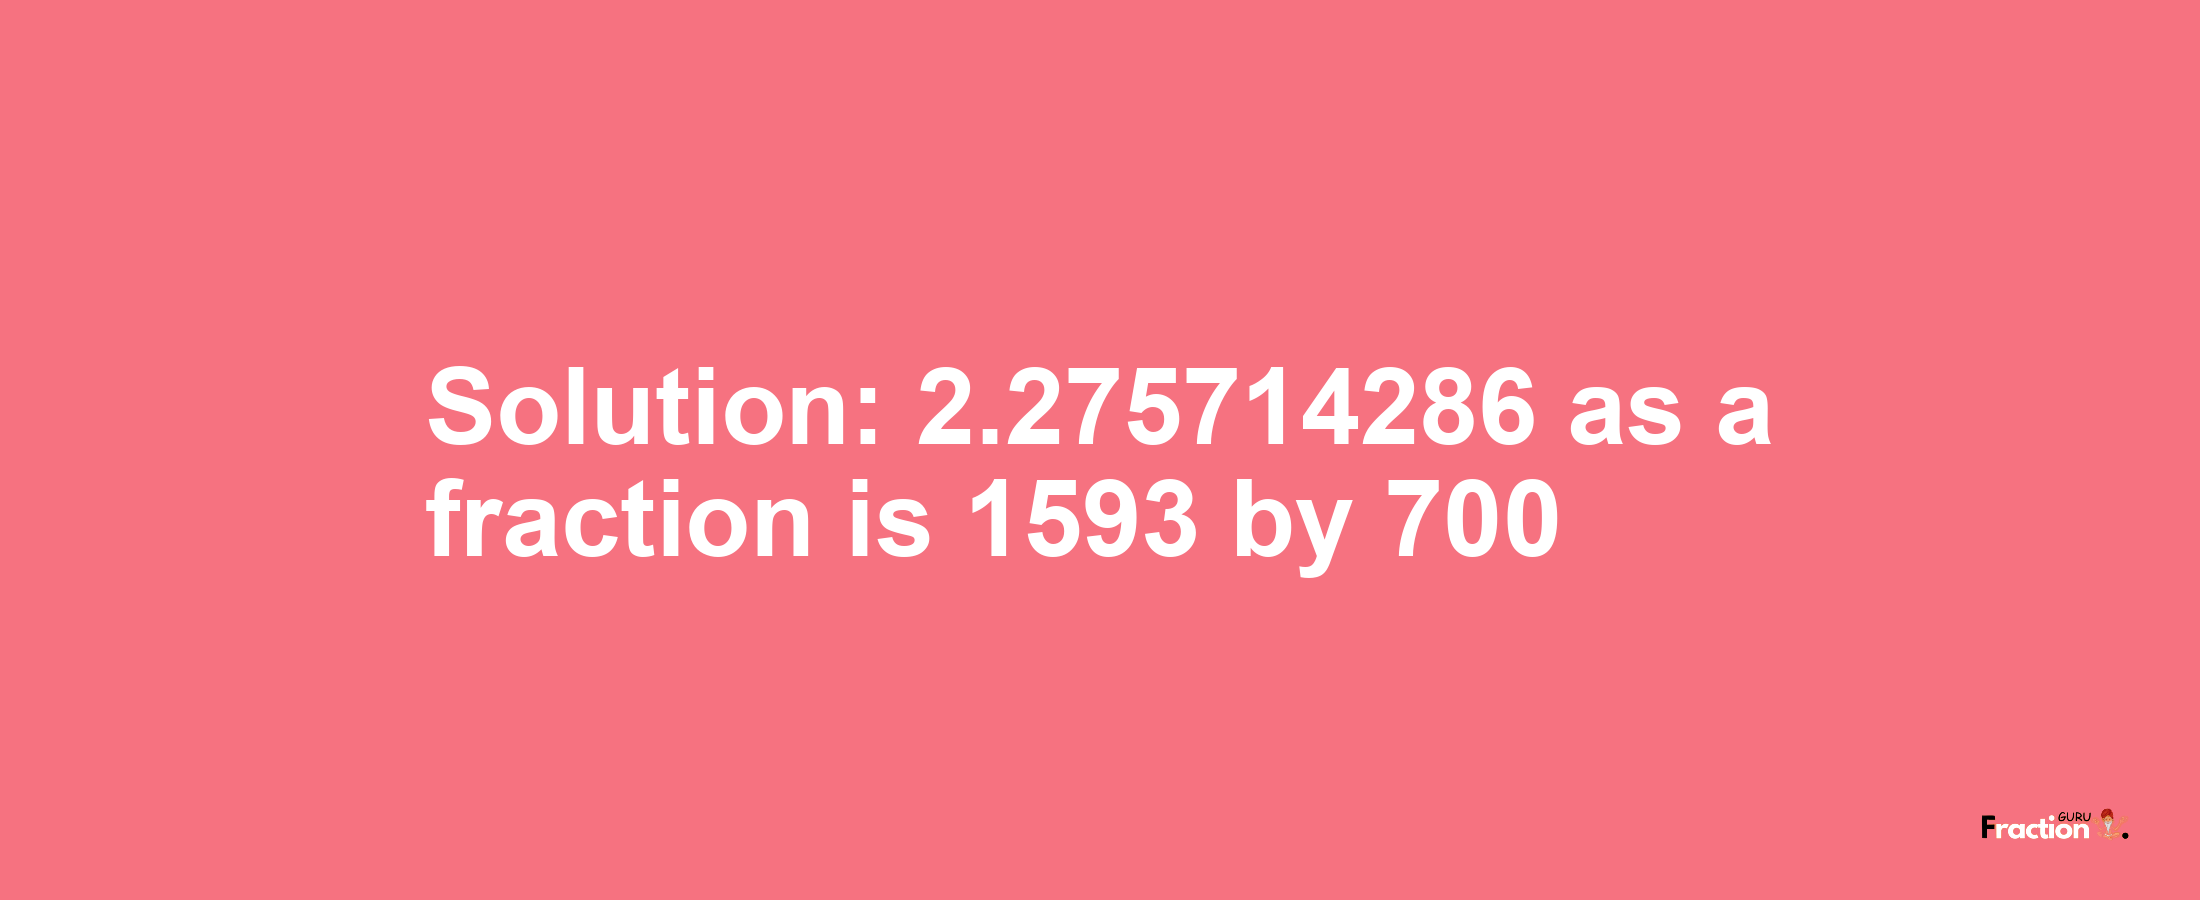 Solution:2.275714286 as a fraction is 1593/700